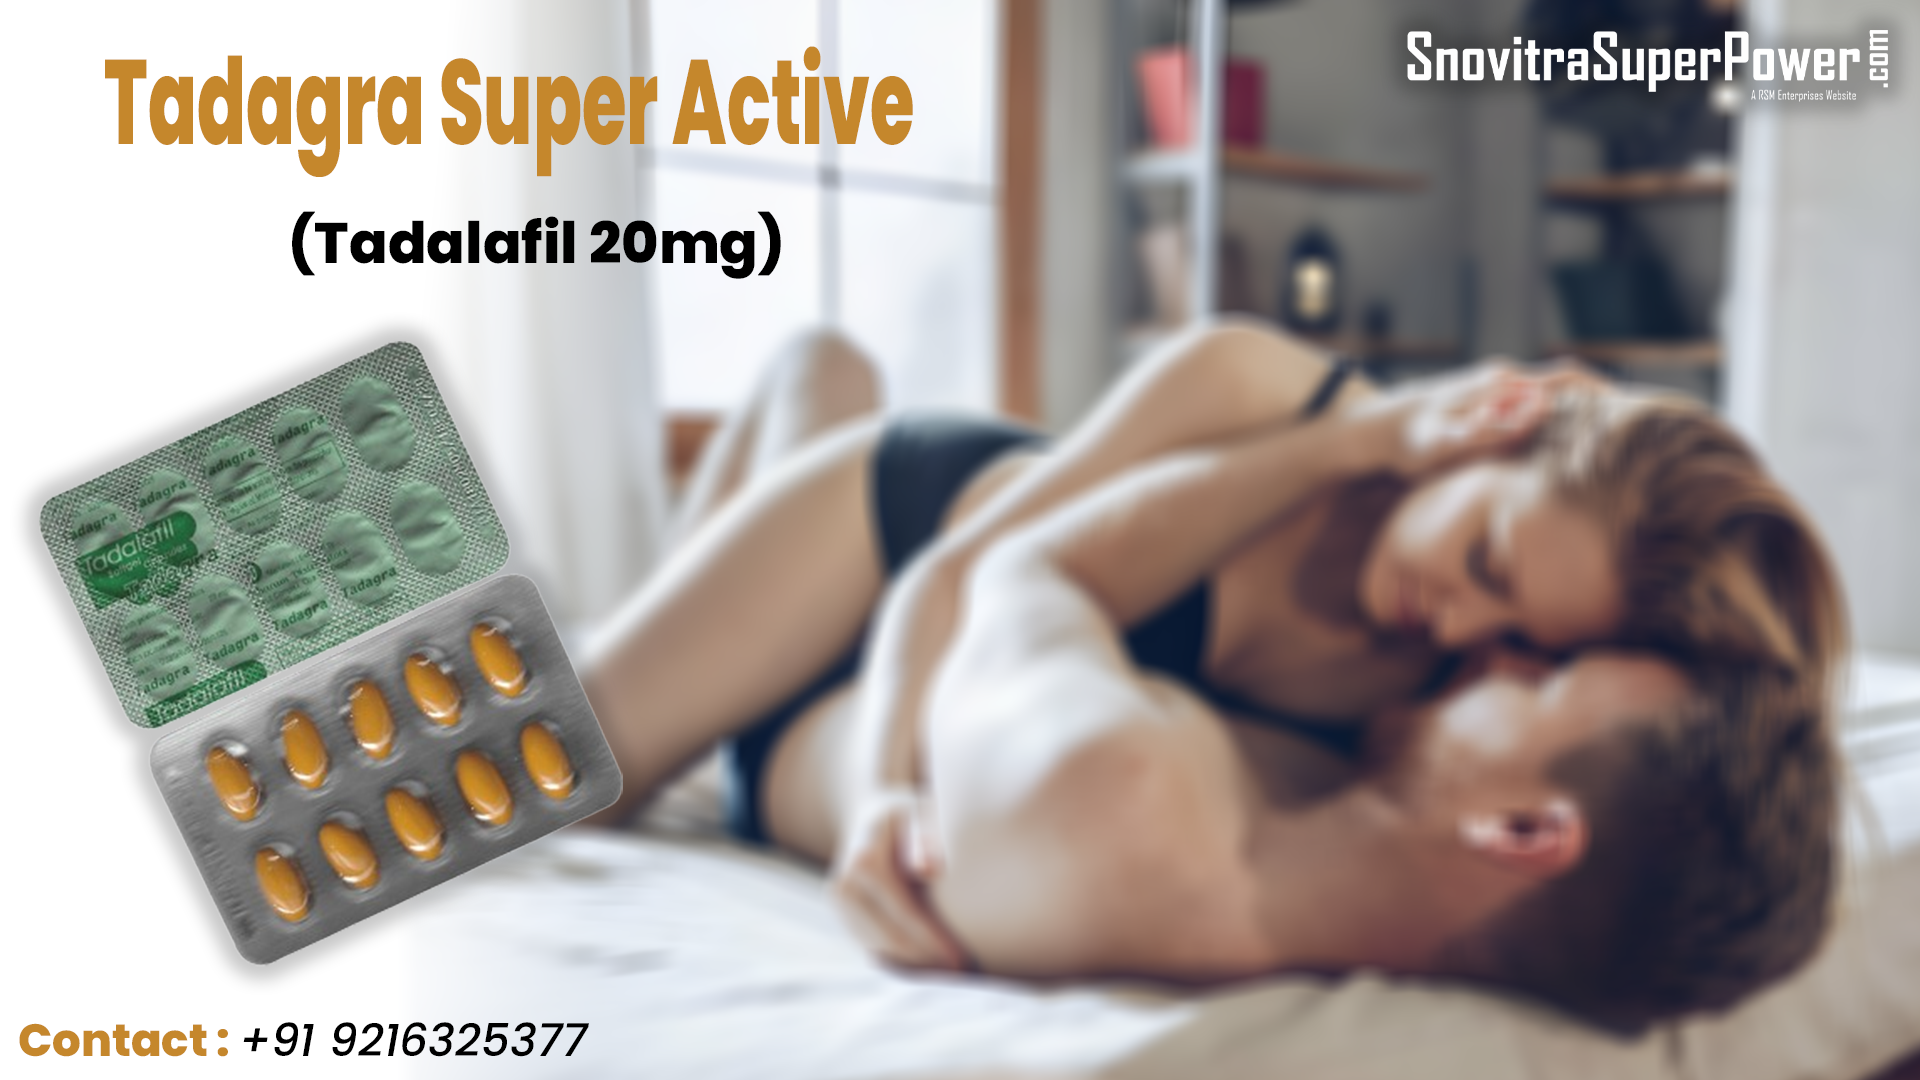 Tadagra Super Active: An Instant Remedy to Fix Erection Failure